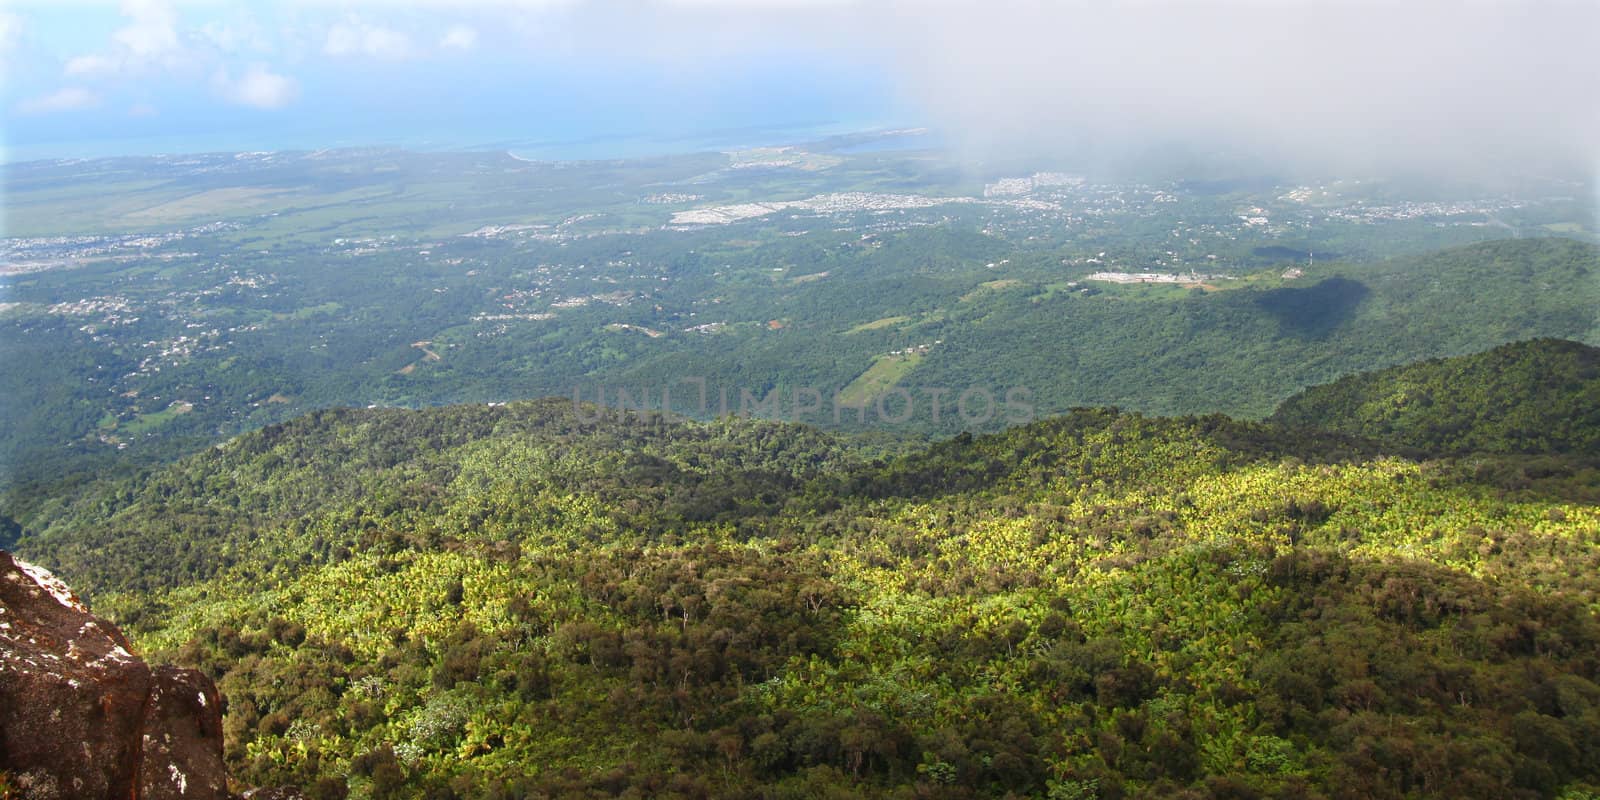 View of the Puerto Rican landscape from El Yunque Peak.